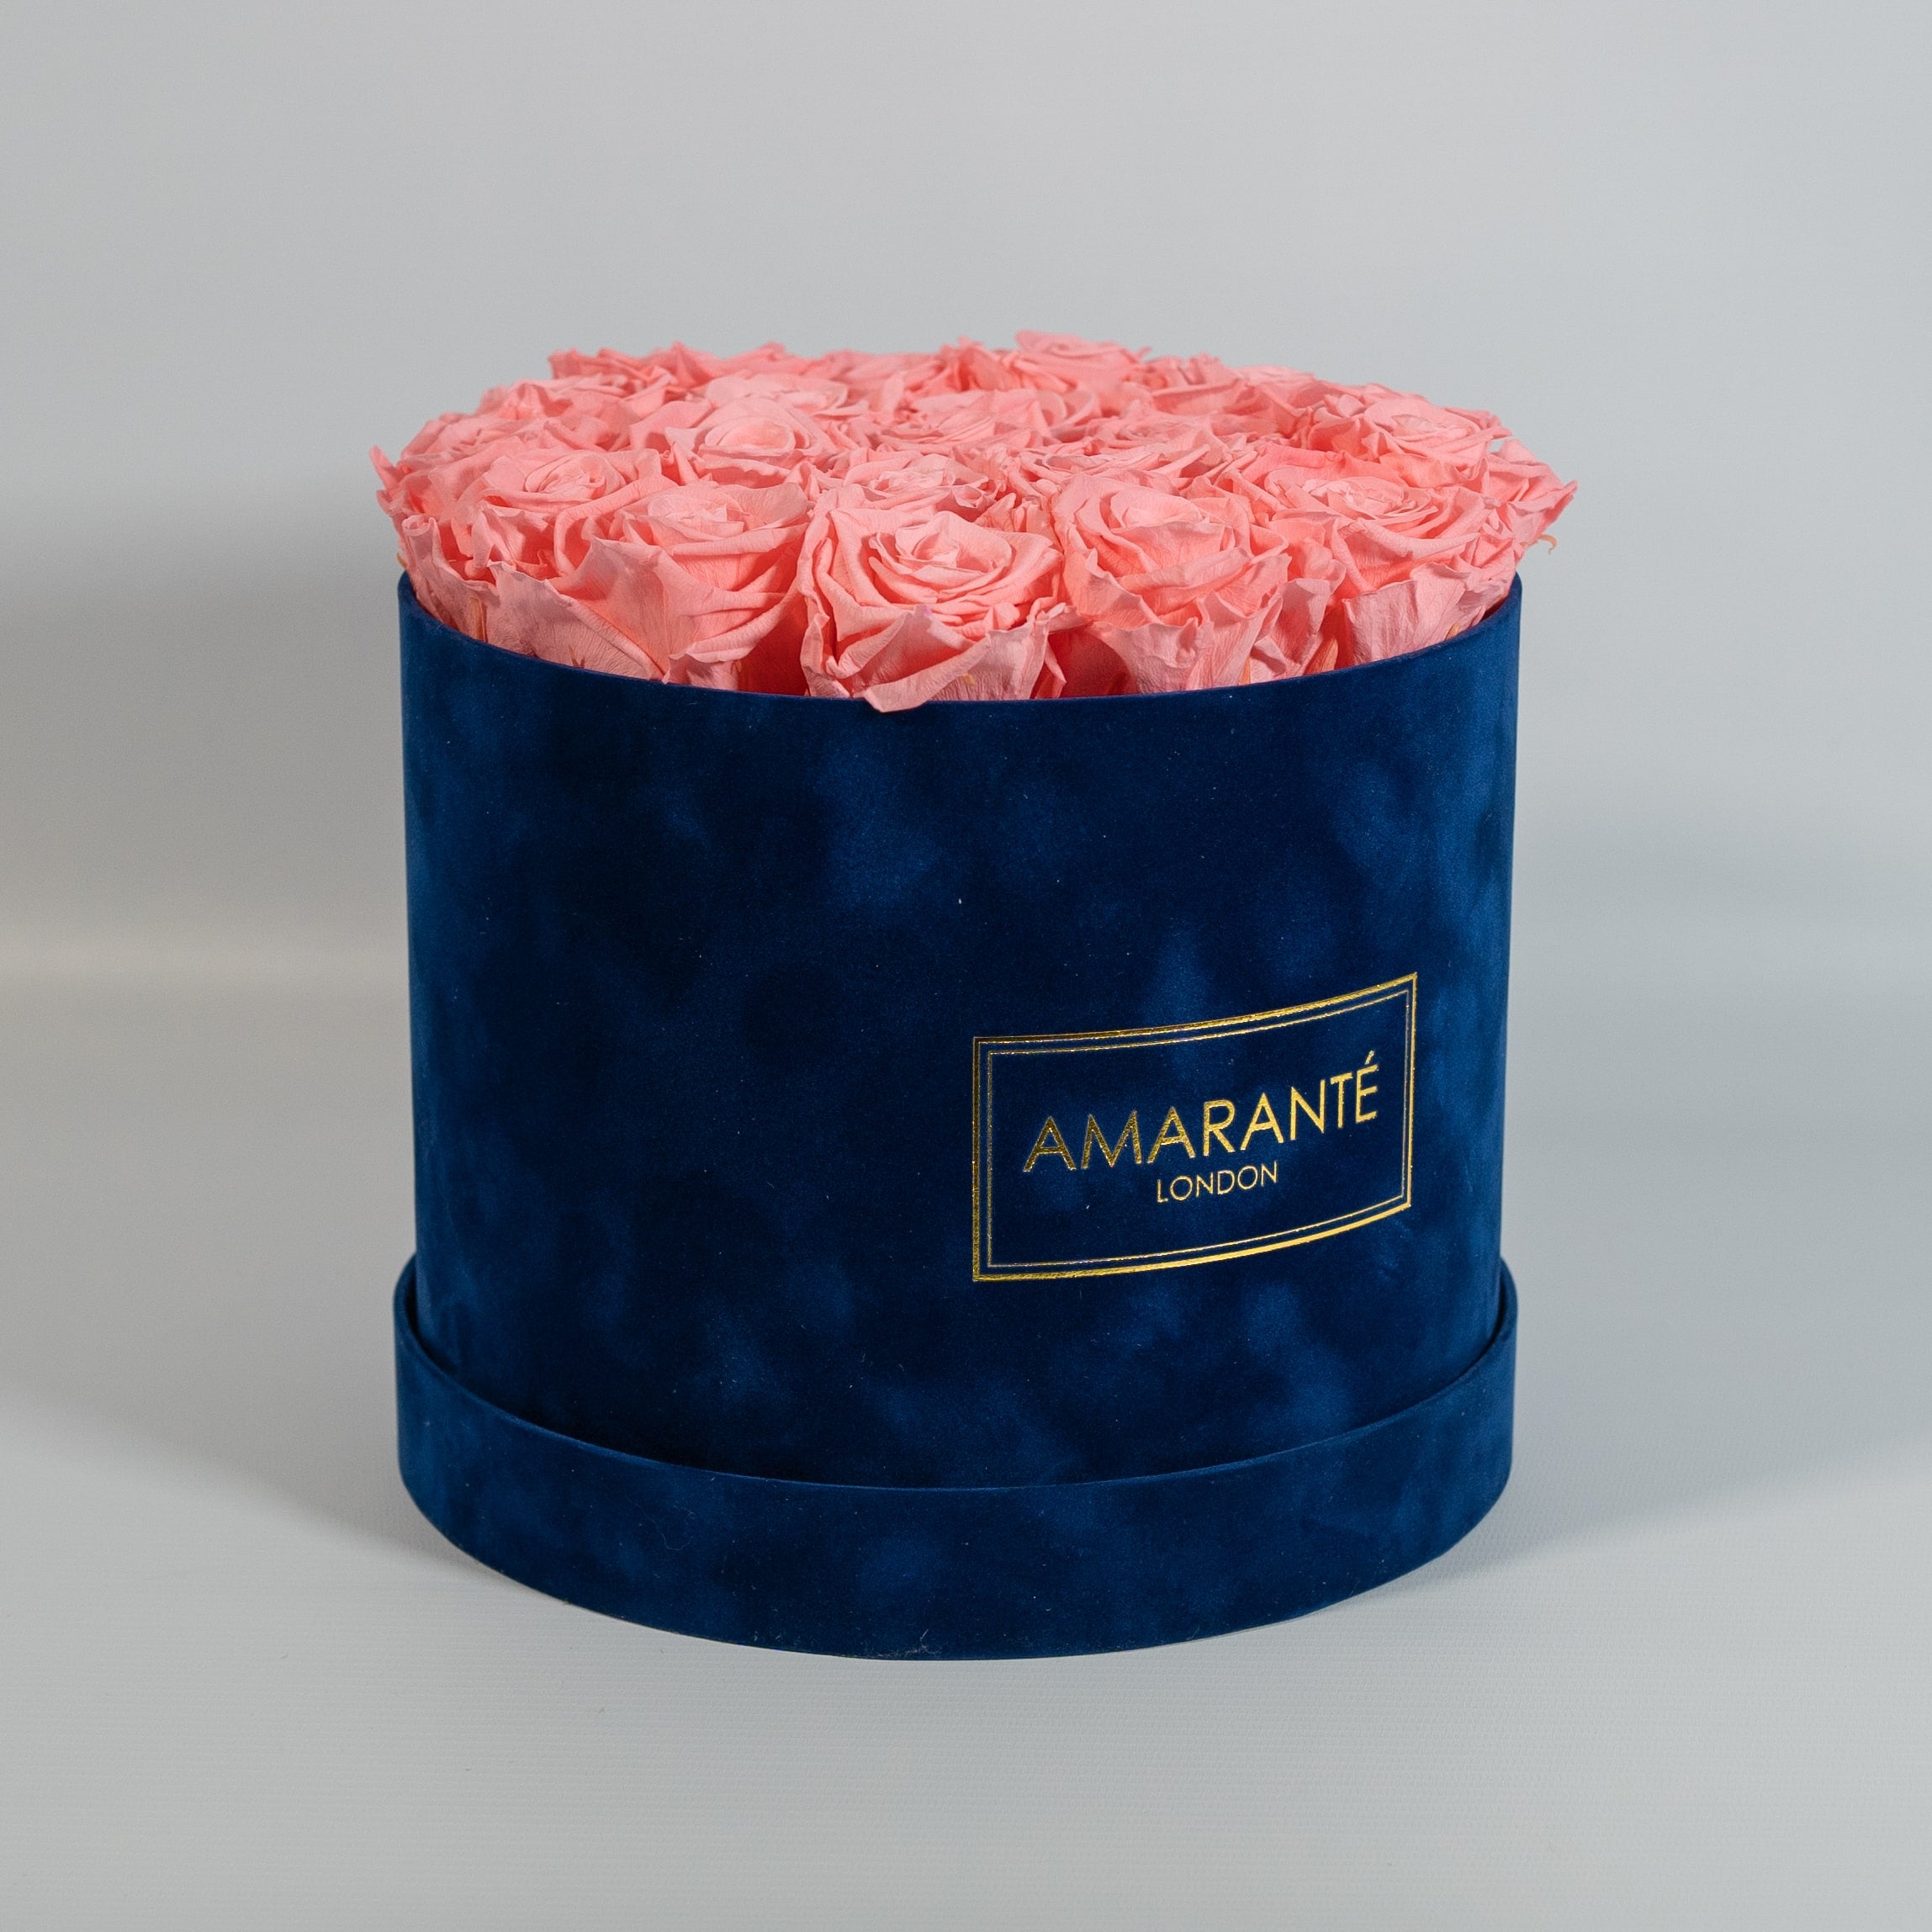 Delicate light pink Roses encompassed in a dark blue box 